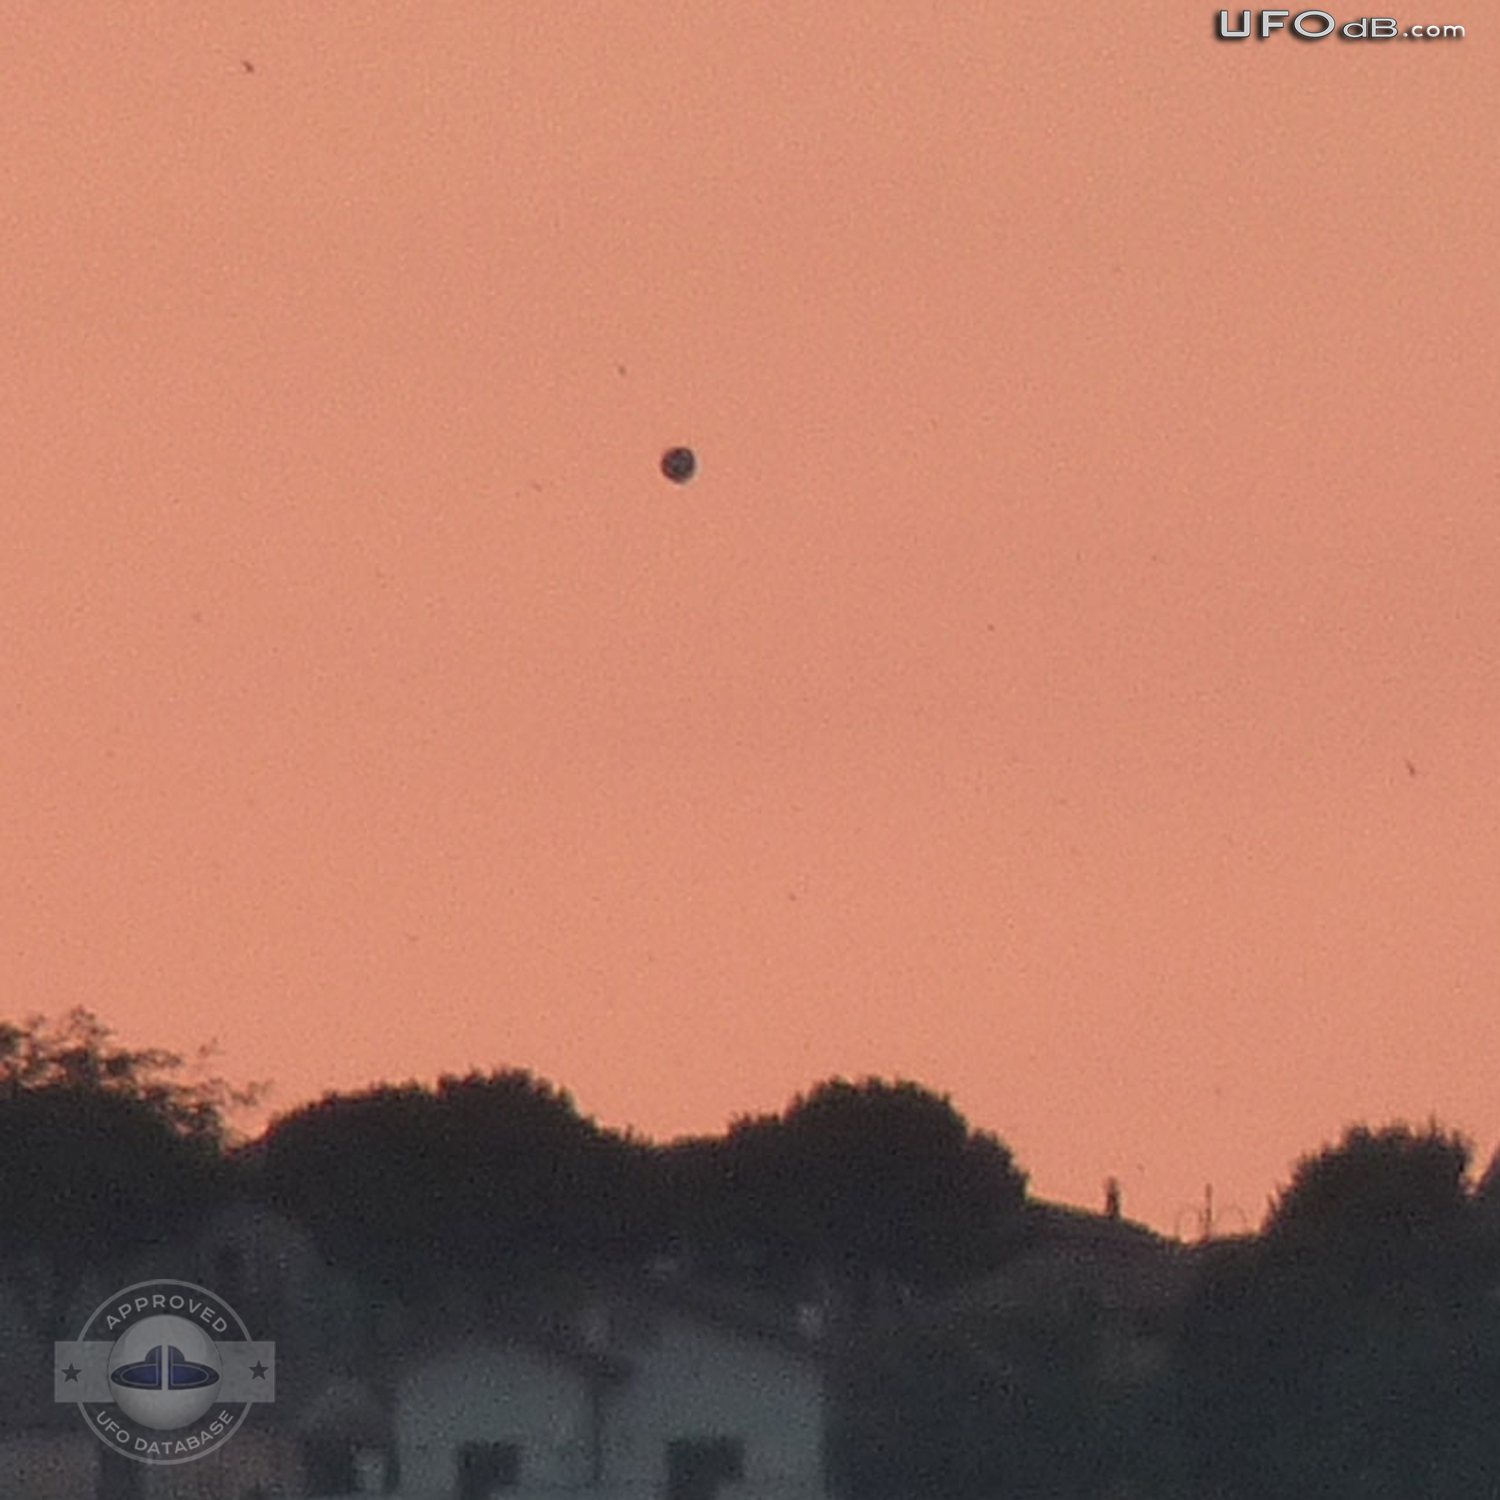 Teramo, Abruzzo visited by spherical UFO at sundown | Italy July 2011 UFO Picture #358-2